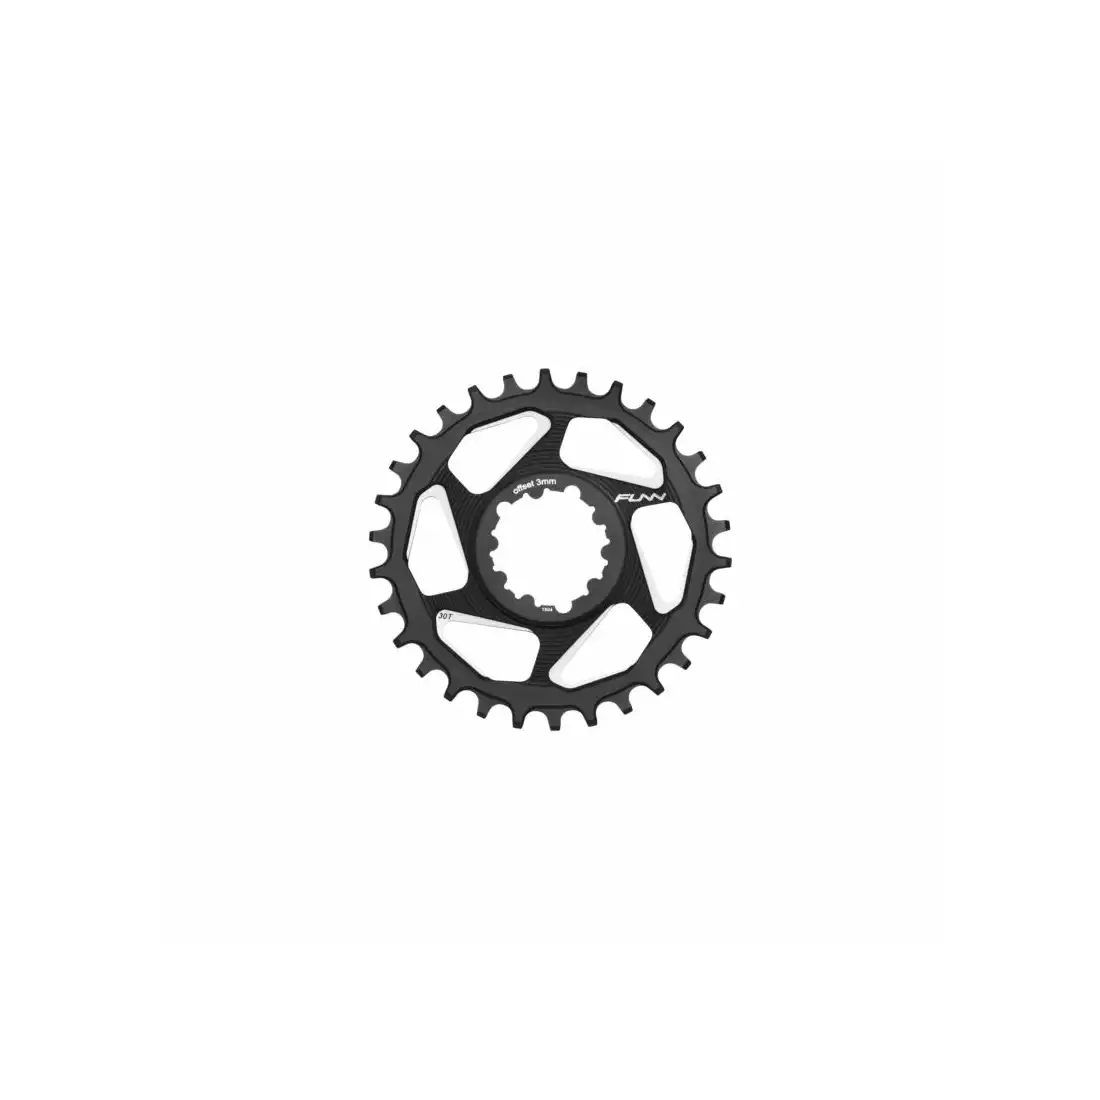 FUNN SOLO DX NARROW-WIDE BOOST 30T sprocket for crank black